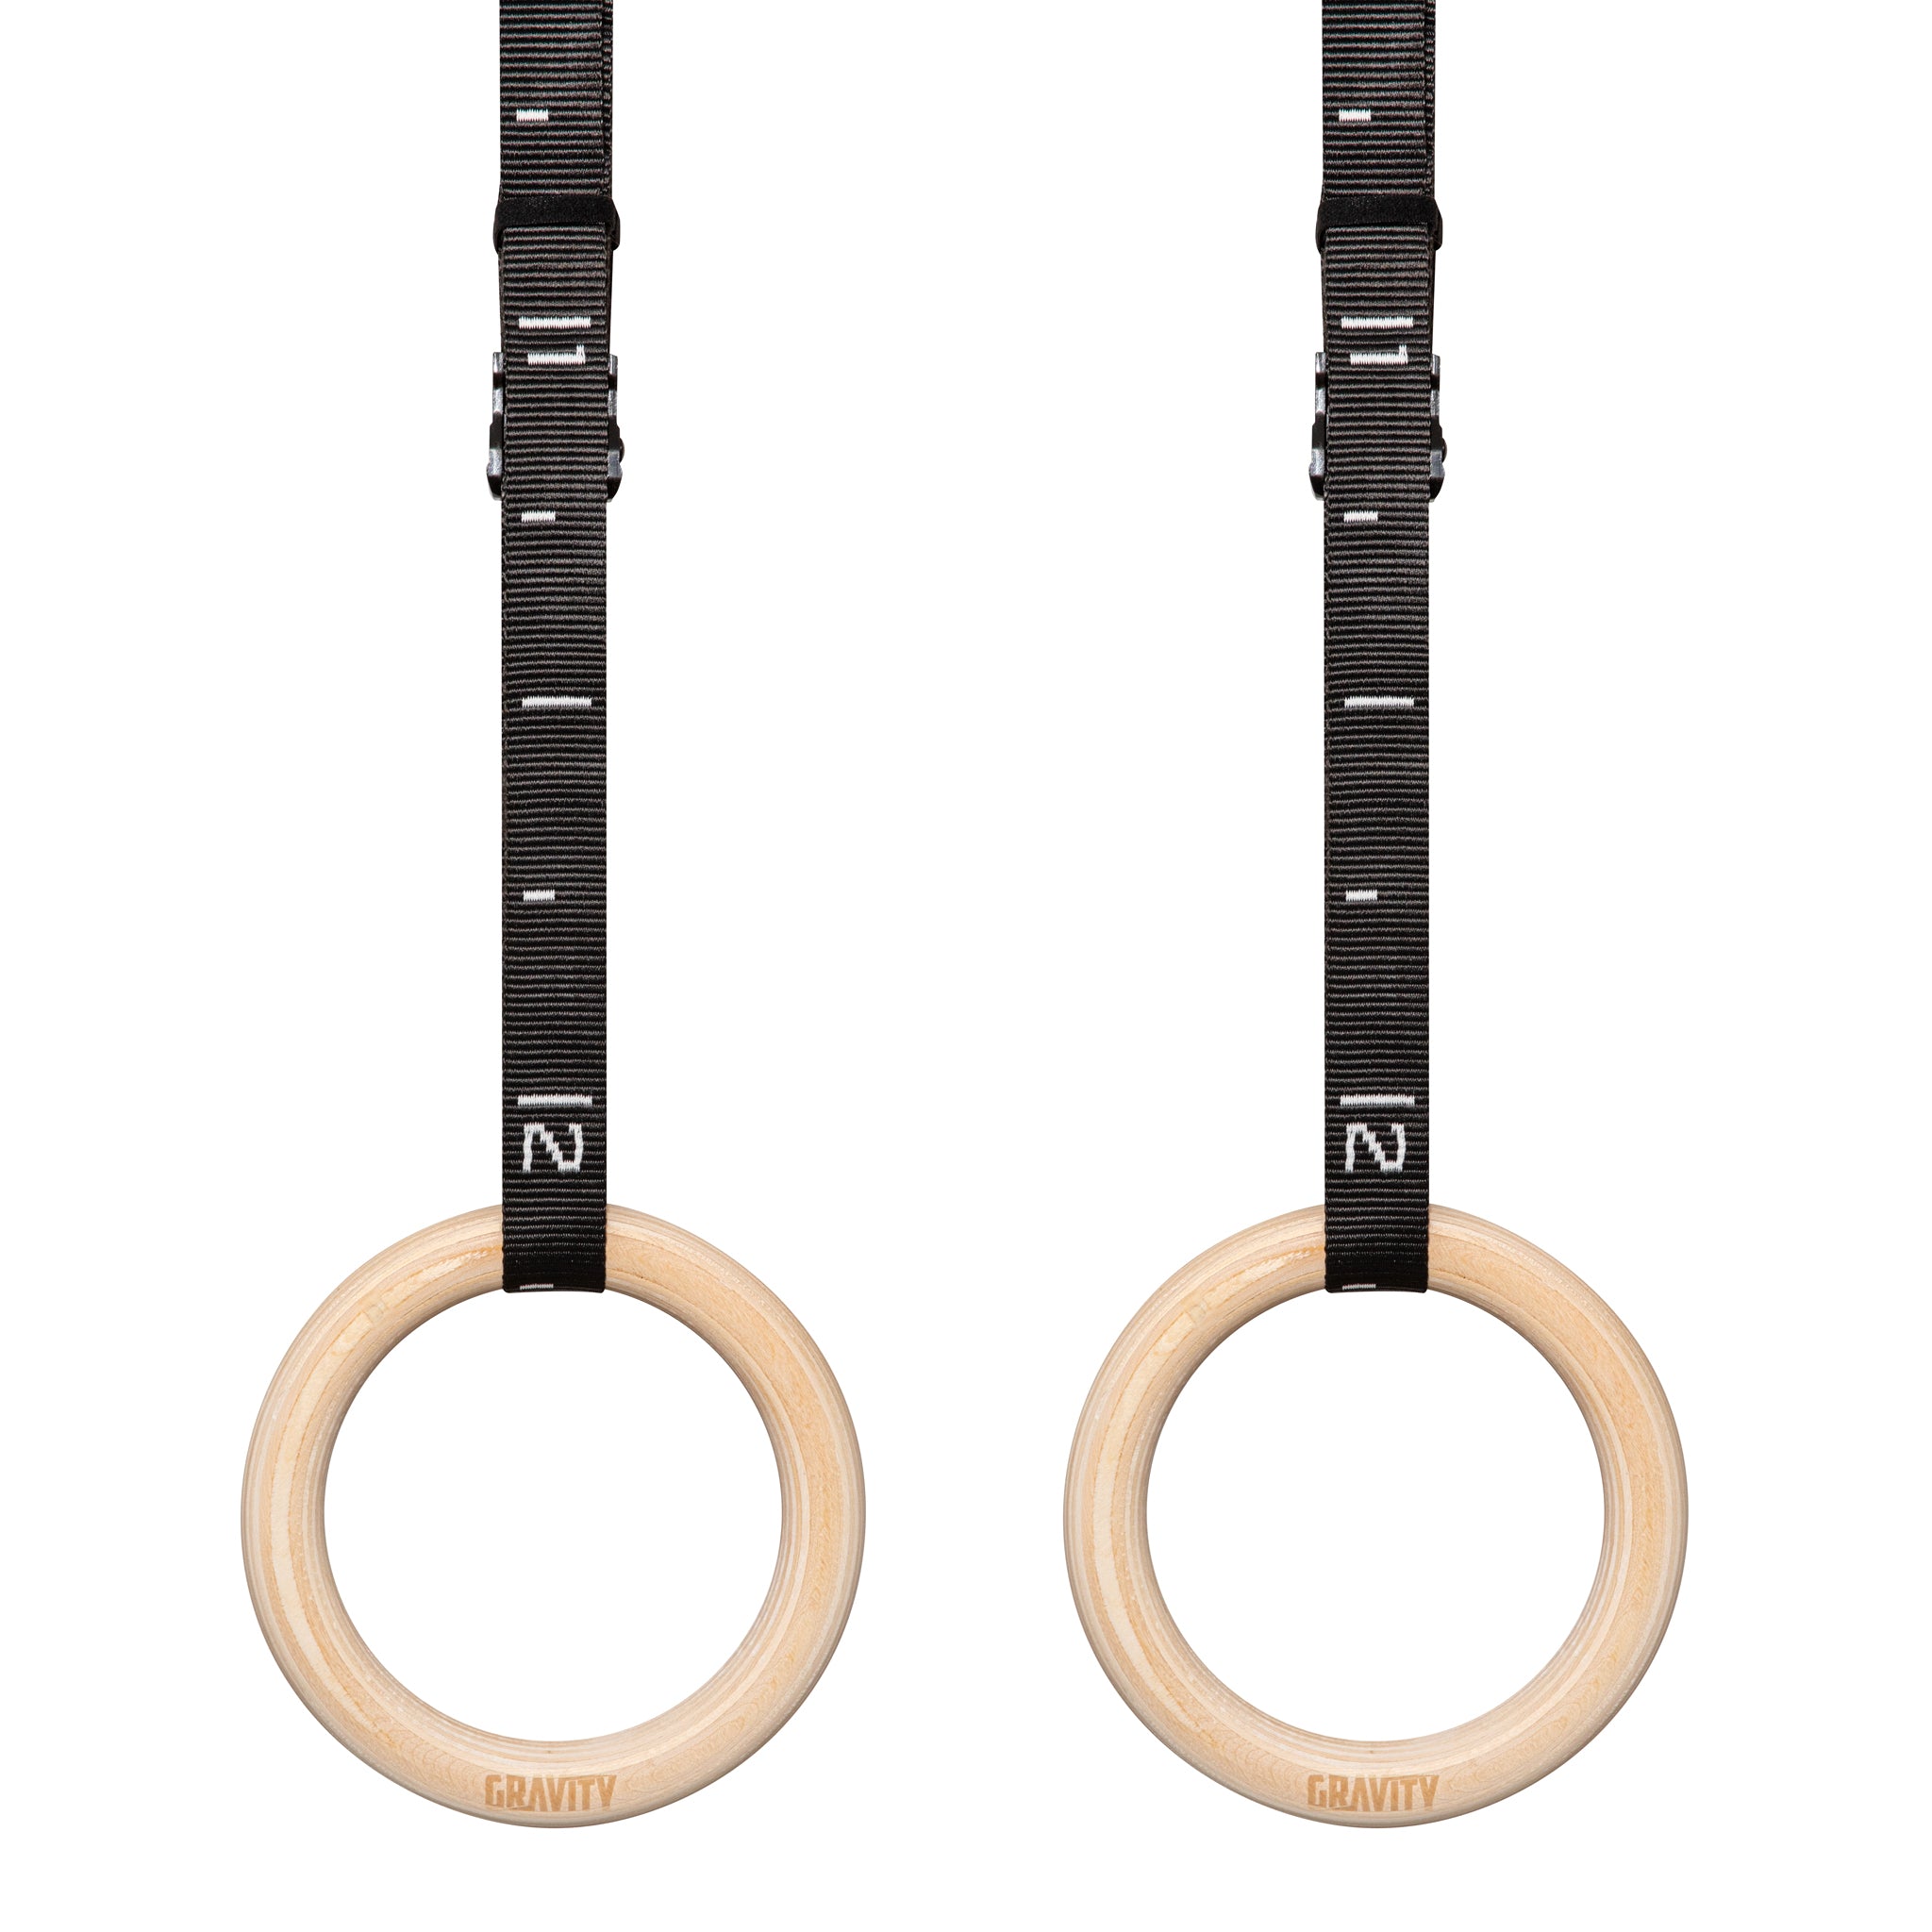 Gymnastic Rings: Wood or Plastic? - Gravity Fitness Equipment